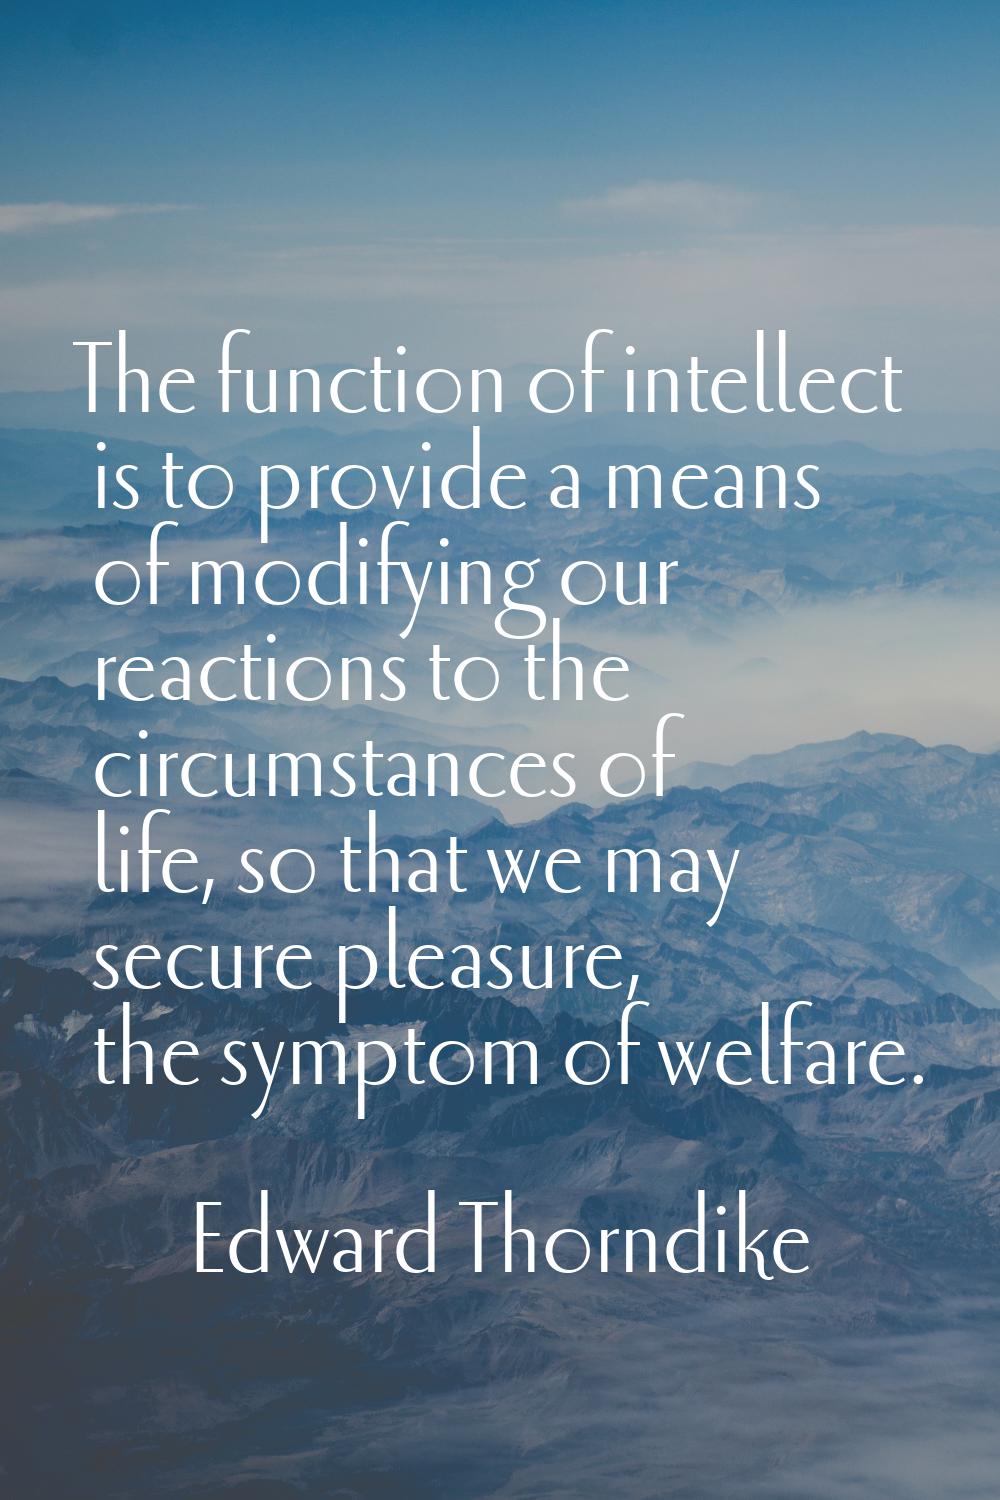 The function of intellect is to provide a means of modifying our reactions to the circumstances of 